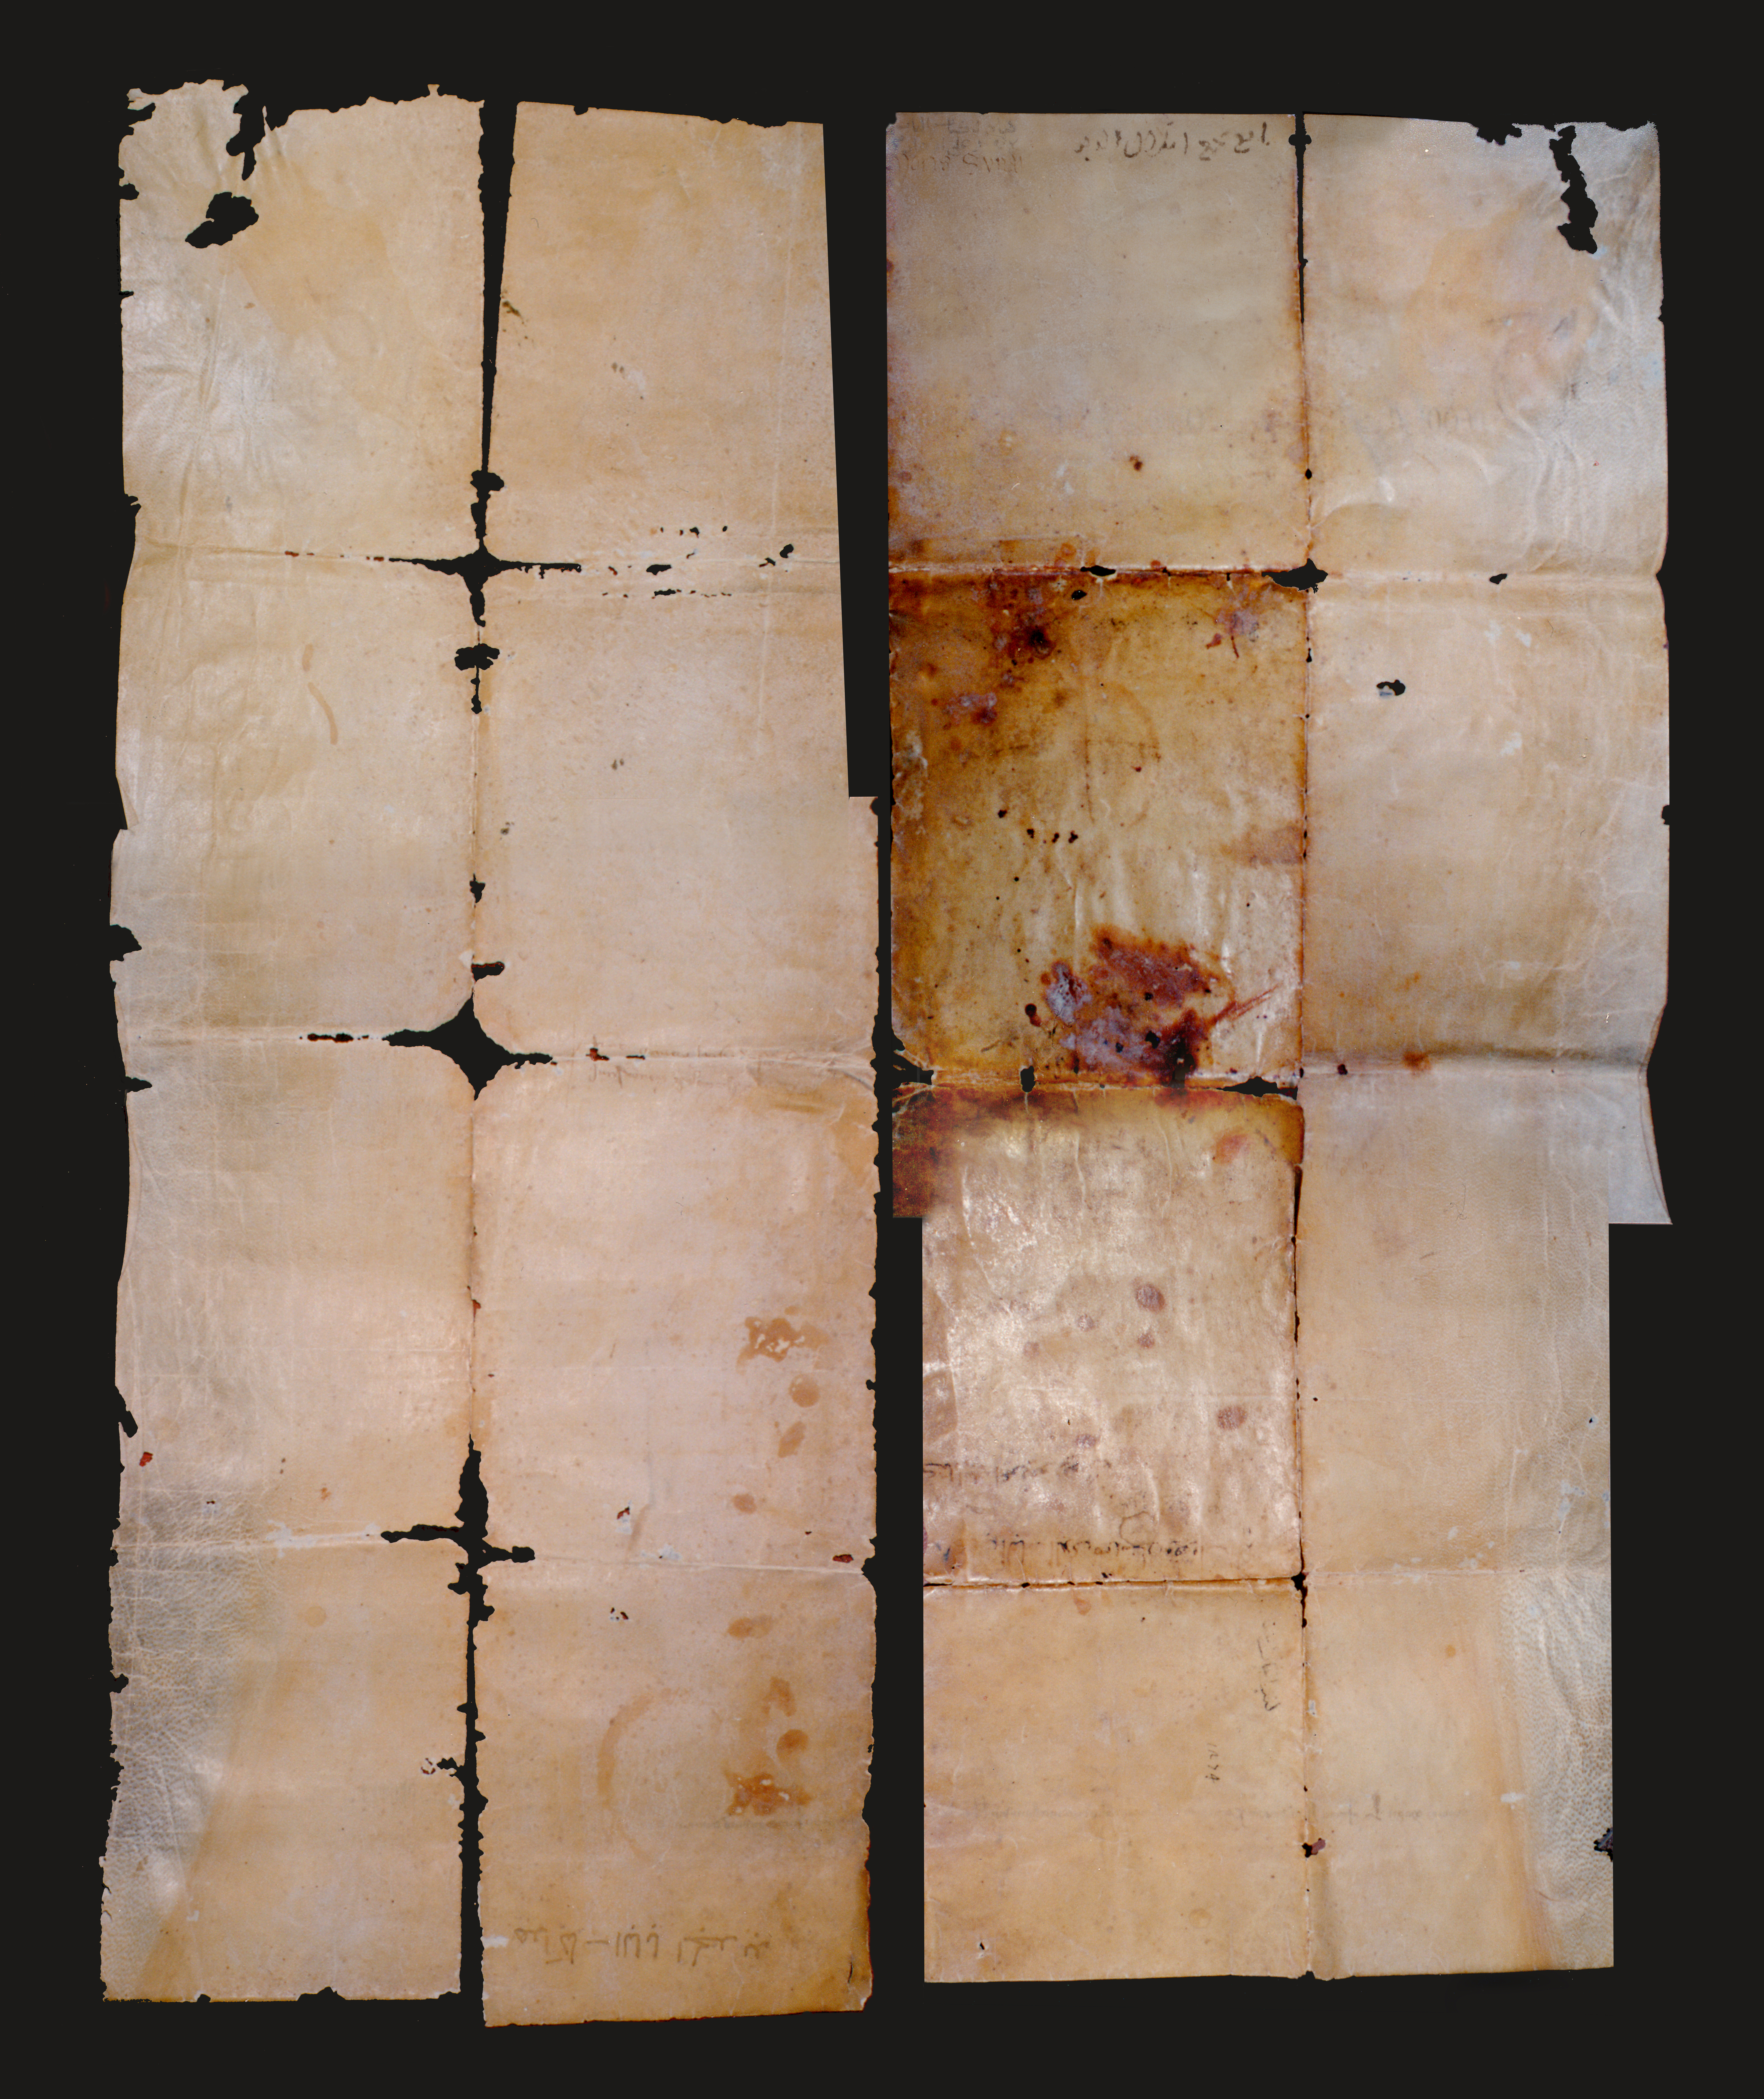 Verso (backside) of the 1274 Papal Bull issued by Pope Gregory X, work-in-progress.